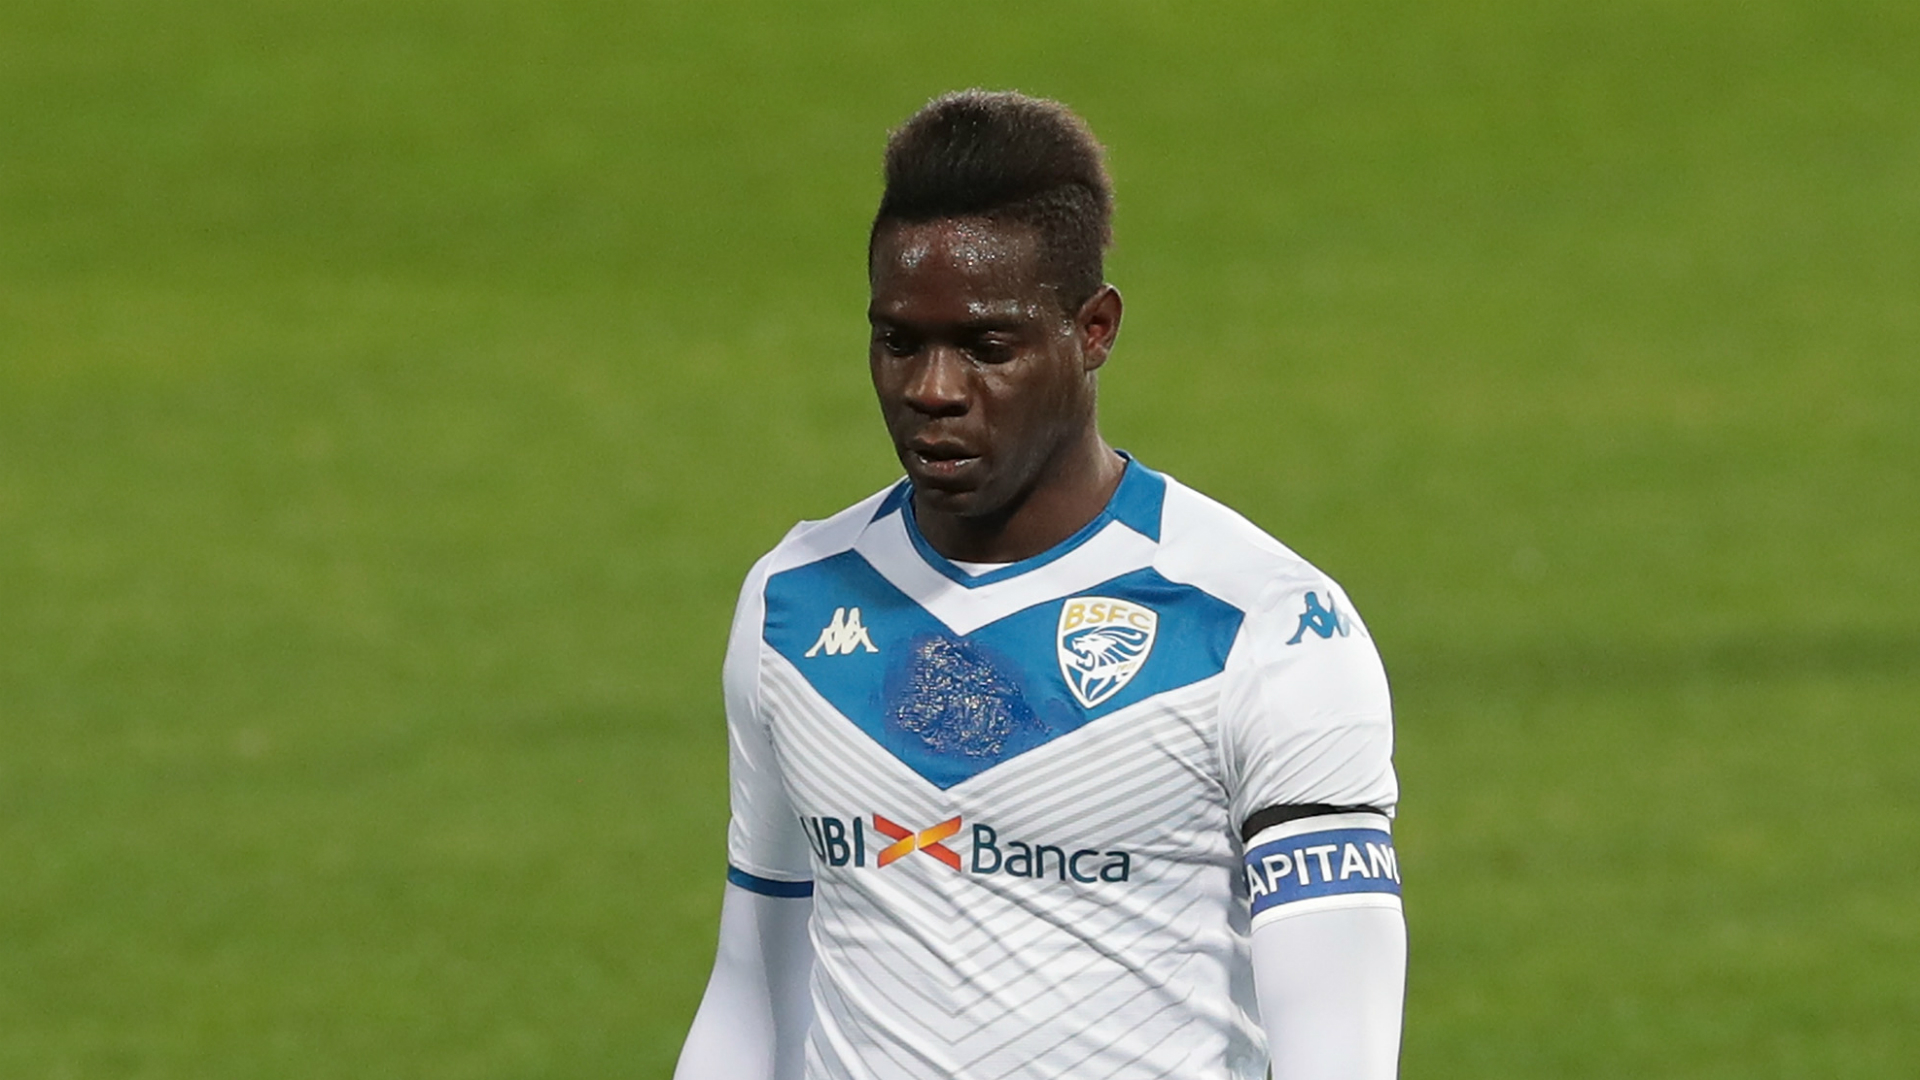 Mario Balotelli is destined to leave hometown side Brescia after just one season, according to club president Massimo Cellino.